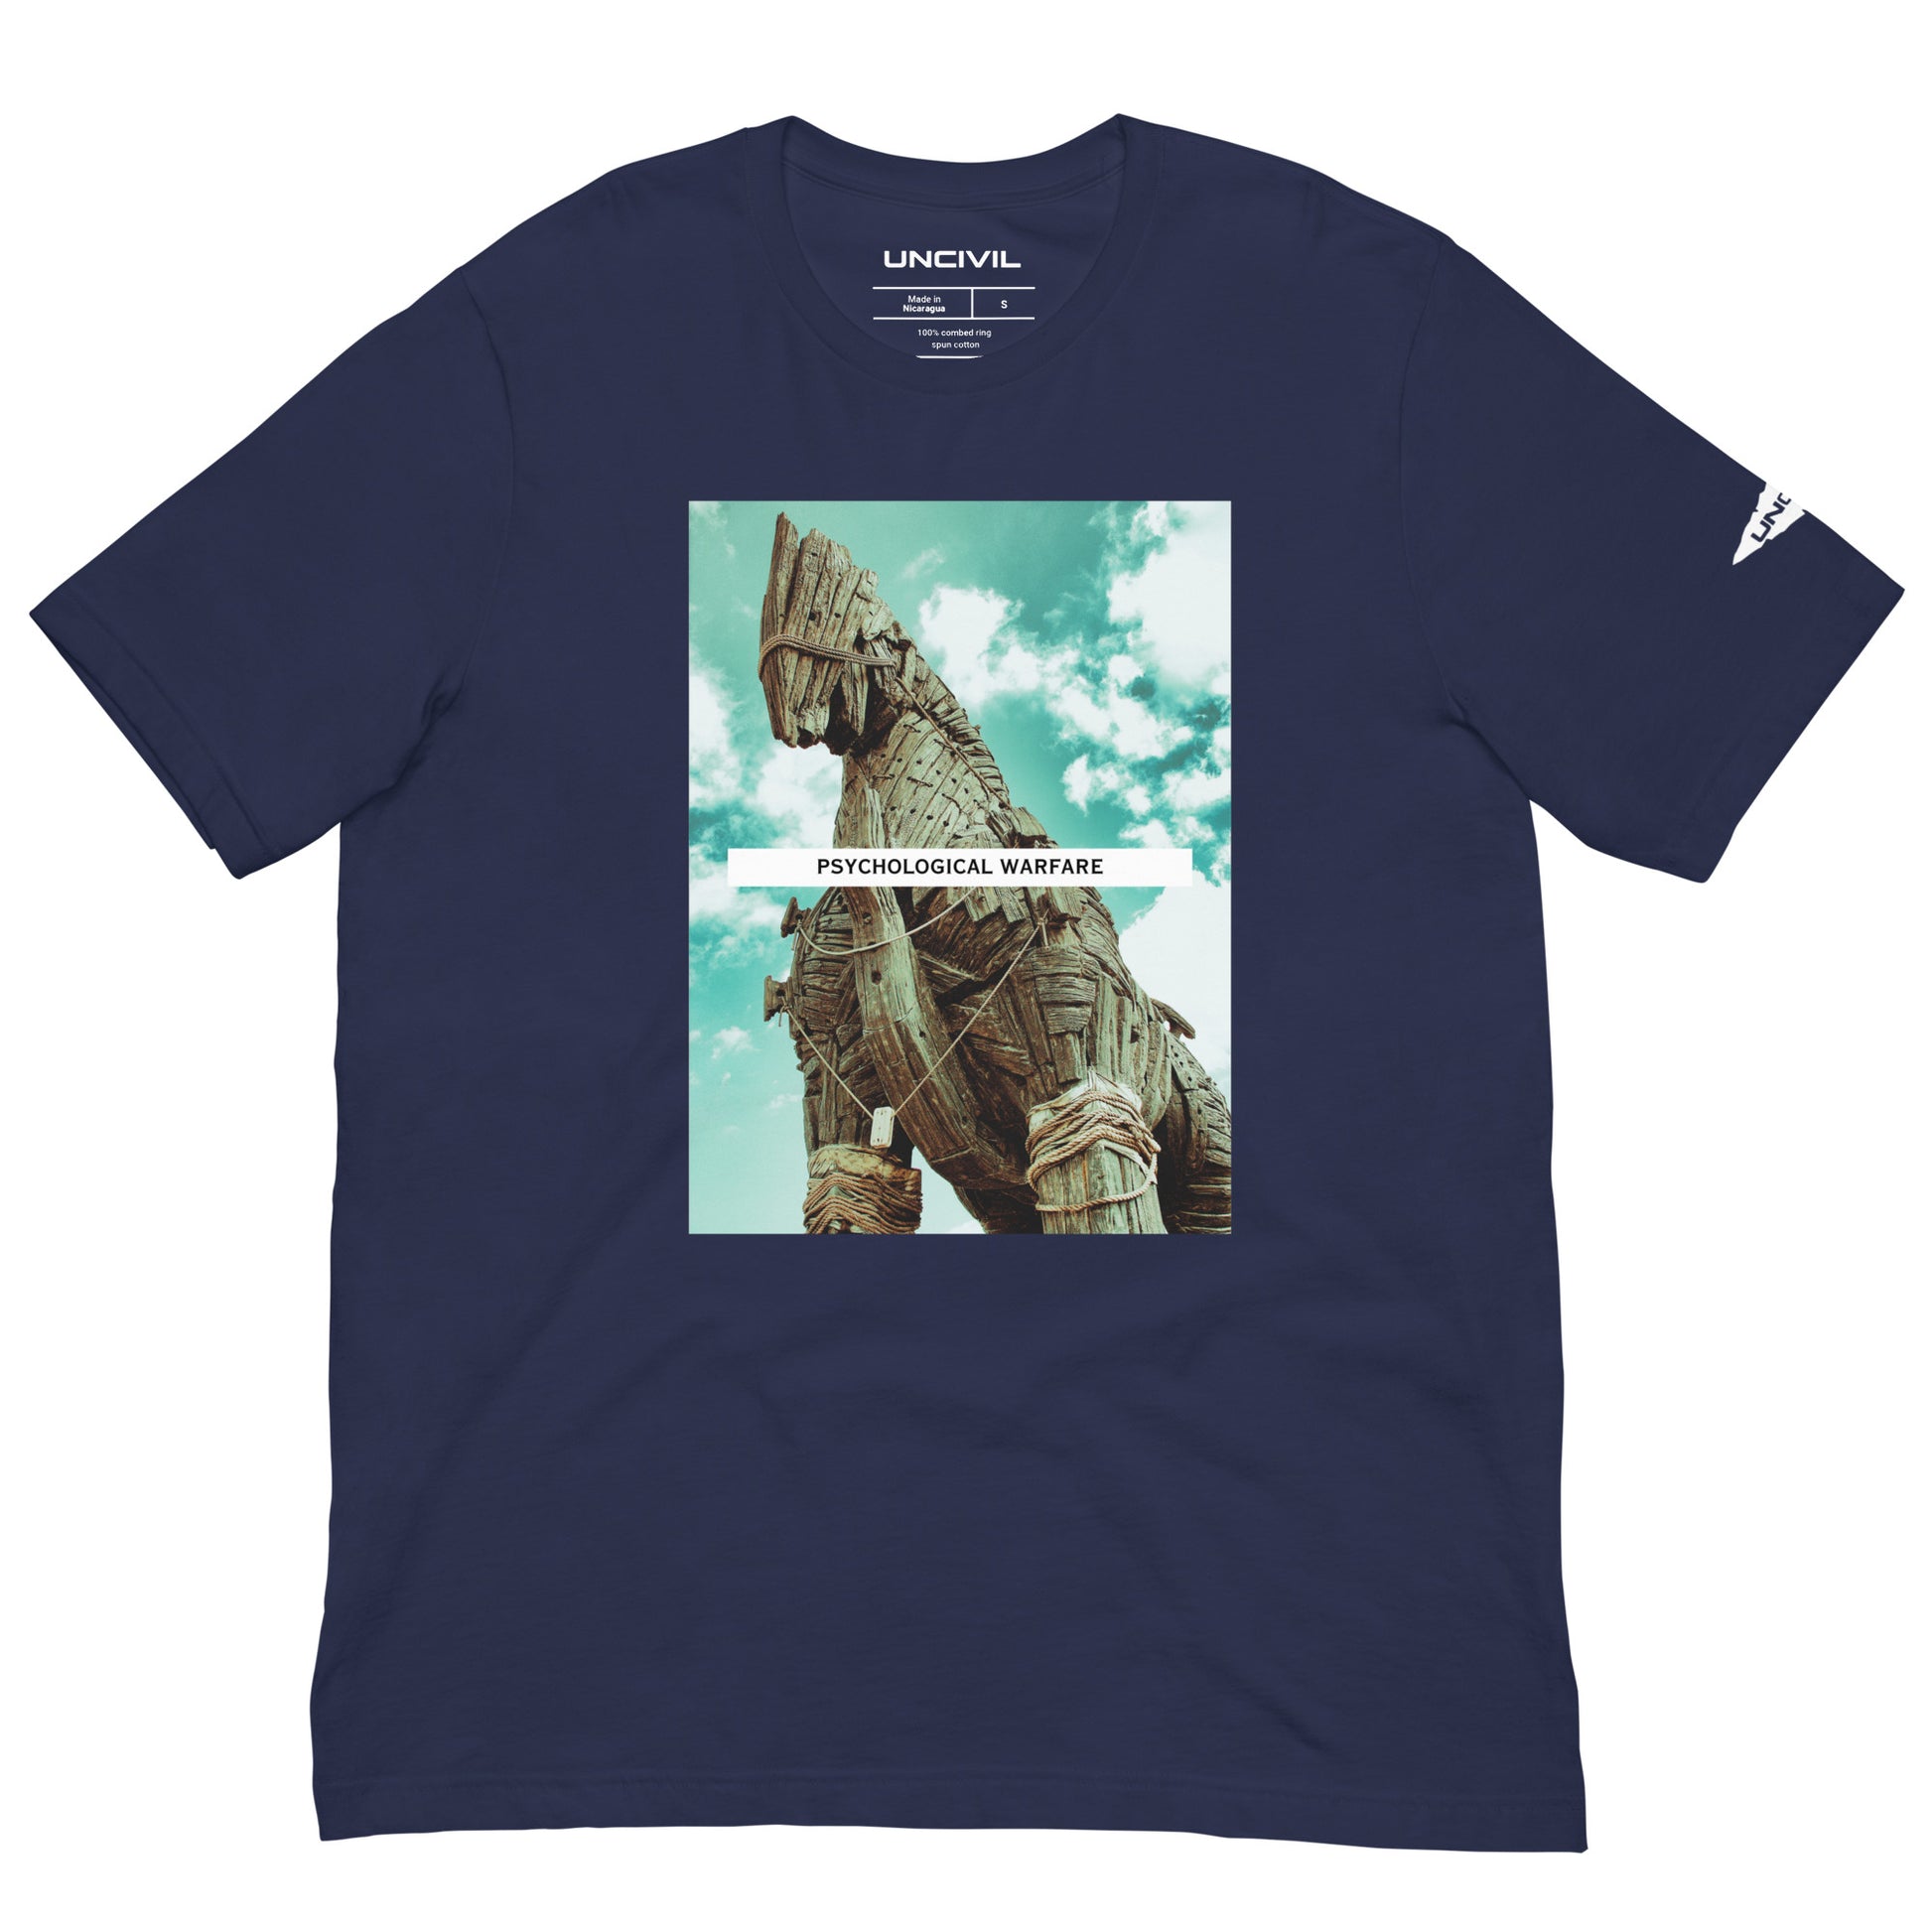 Our Psy Ops shirt features the Trojan Horse, a legendary story from Greek mythology. Navy Blue graphic tee.